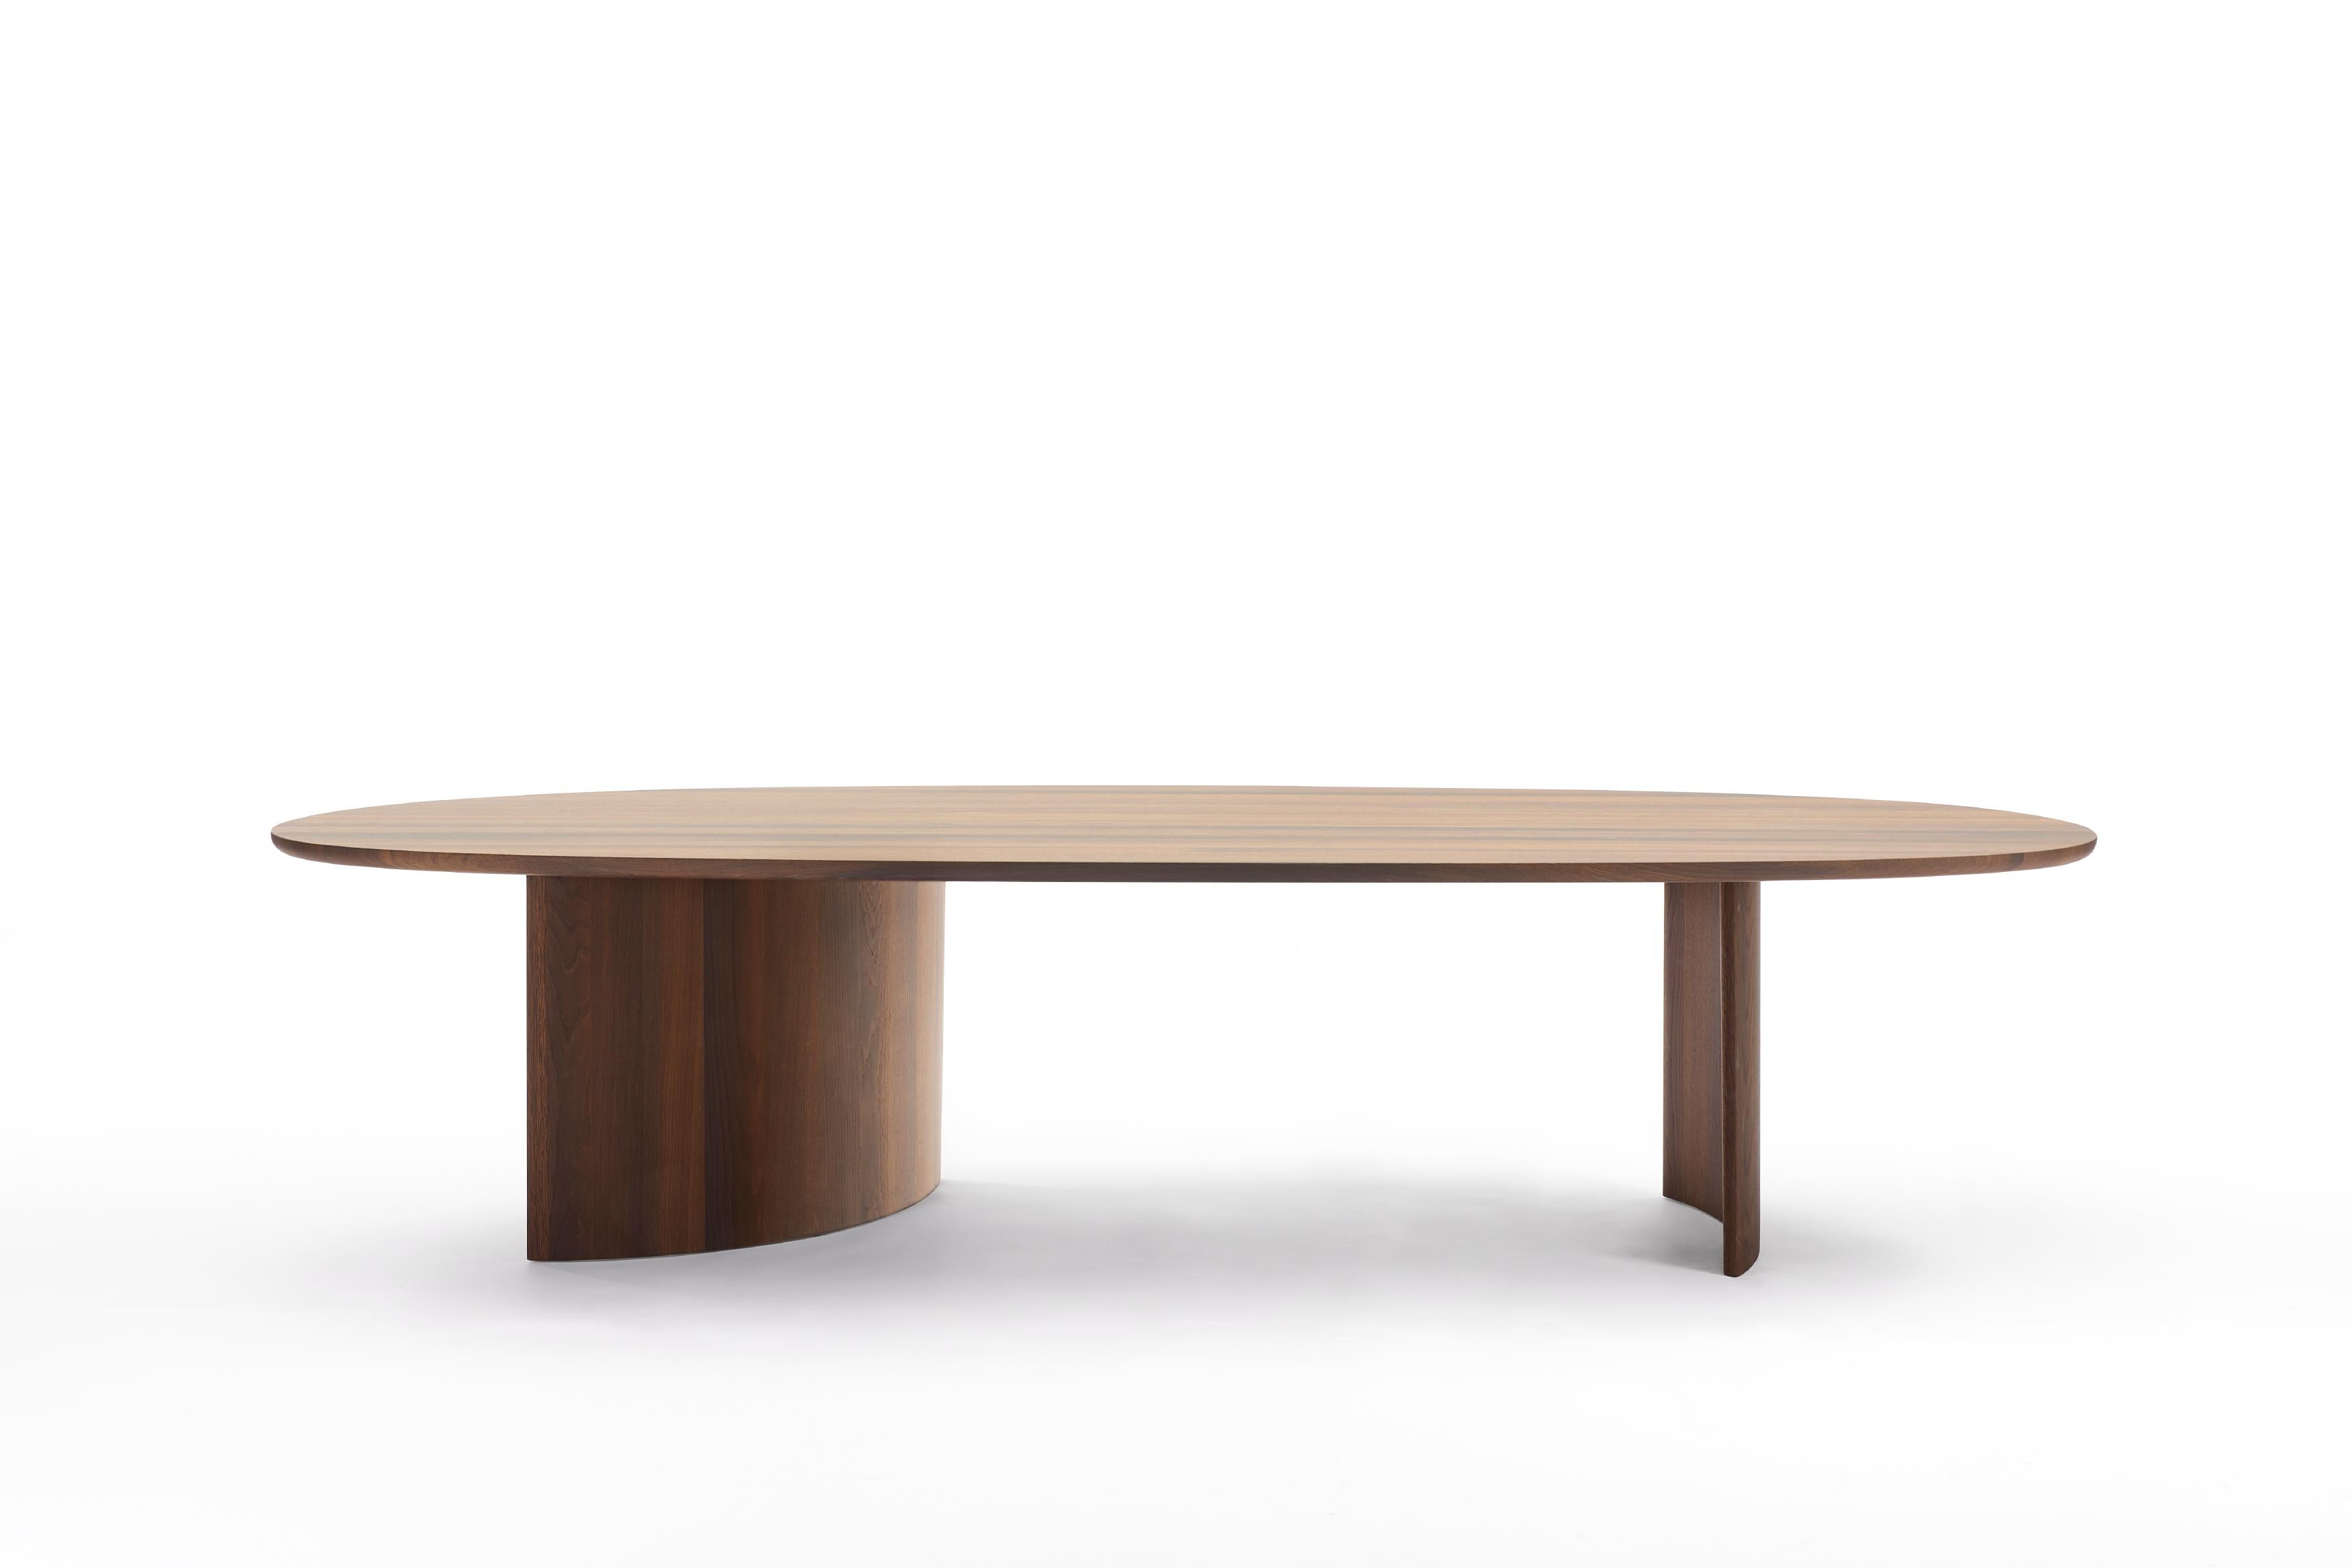 Celebrated designer Sabine Marcelis introduces a new product: the Dew dining table. Dew marks a departure for Sabine. She’s translated her unique form language into a wooden object, resulting in a sculptural object composed of simple organic shapes.